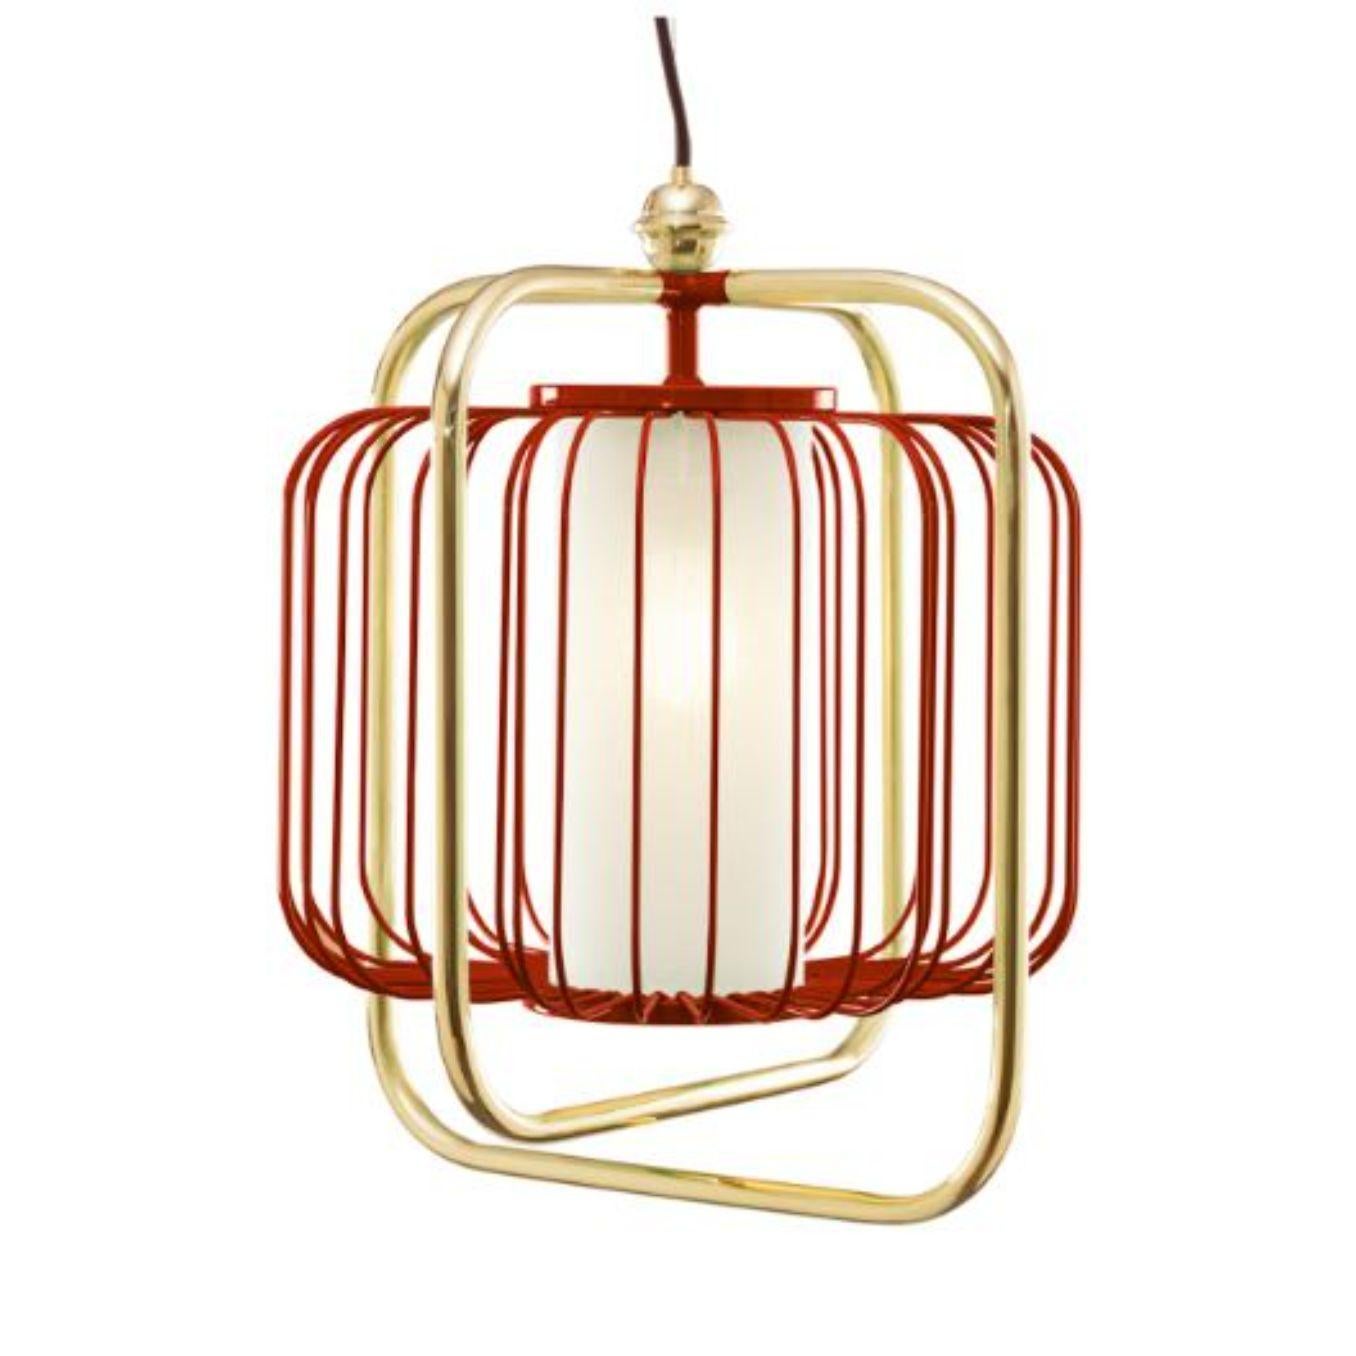 Brass and Lipstick Jules III Suspension Lamp by Dooq For Sale 1